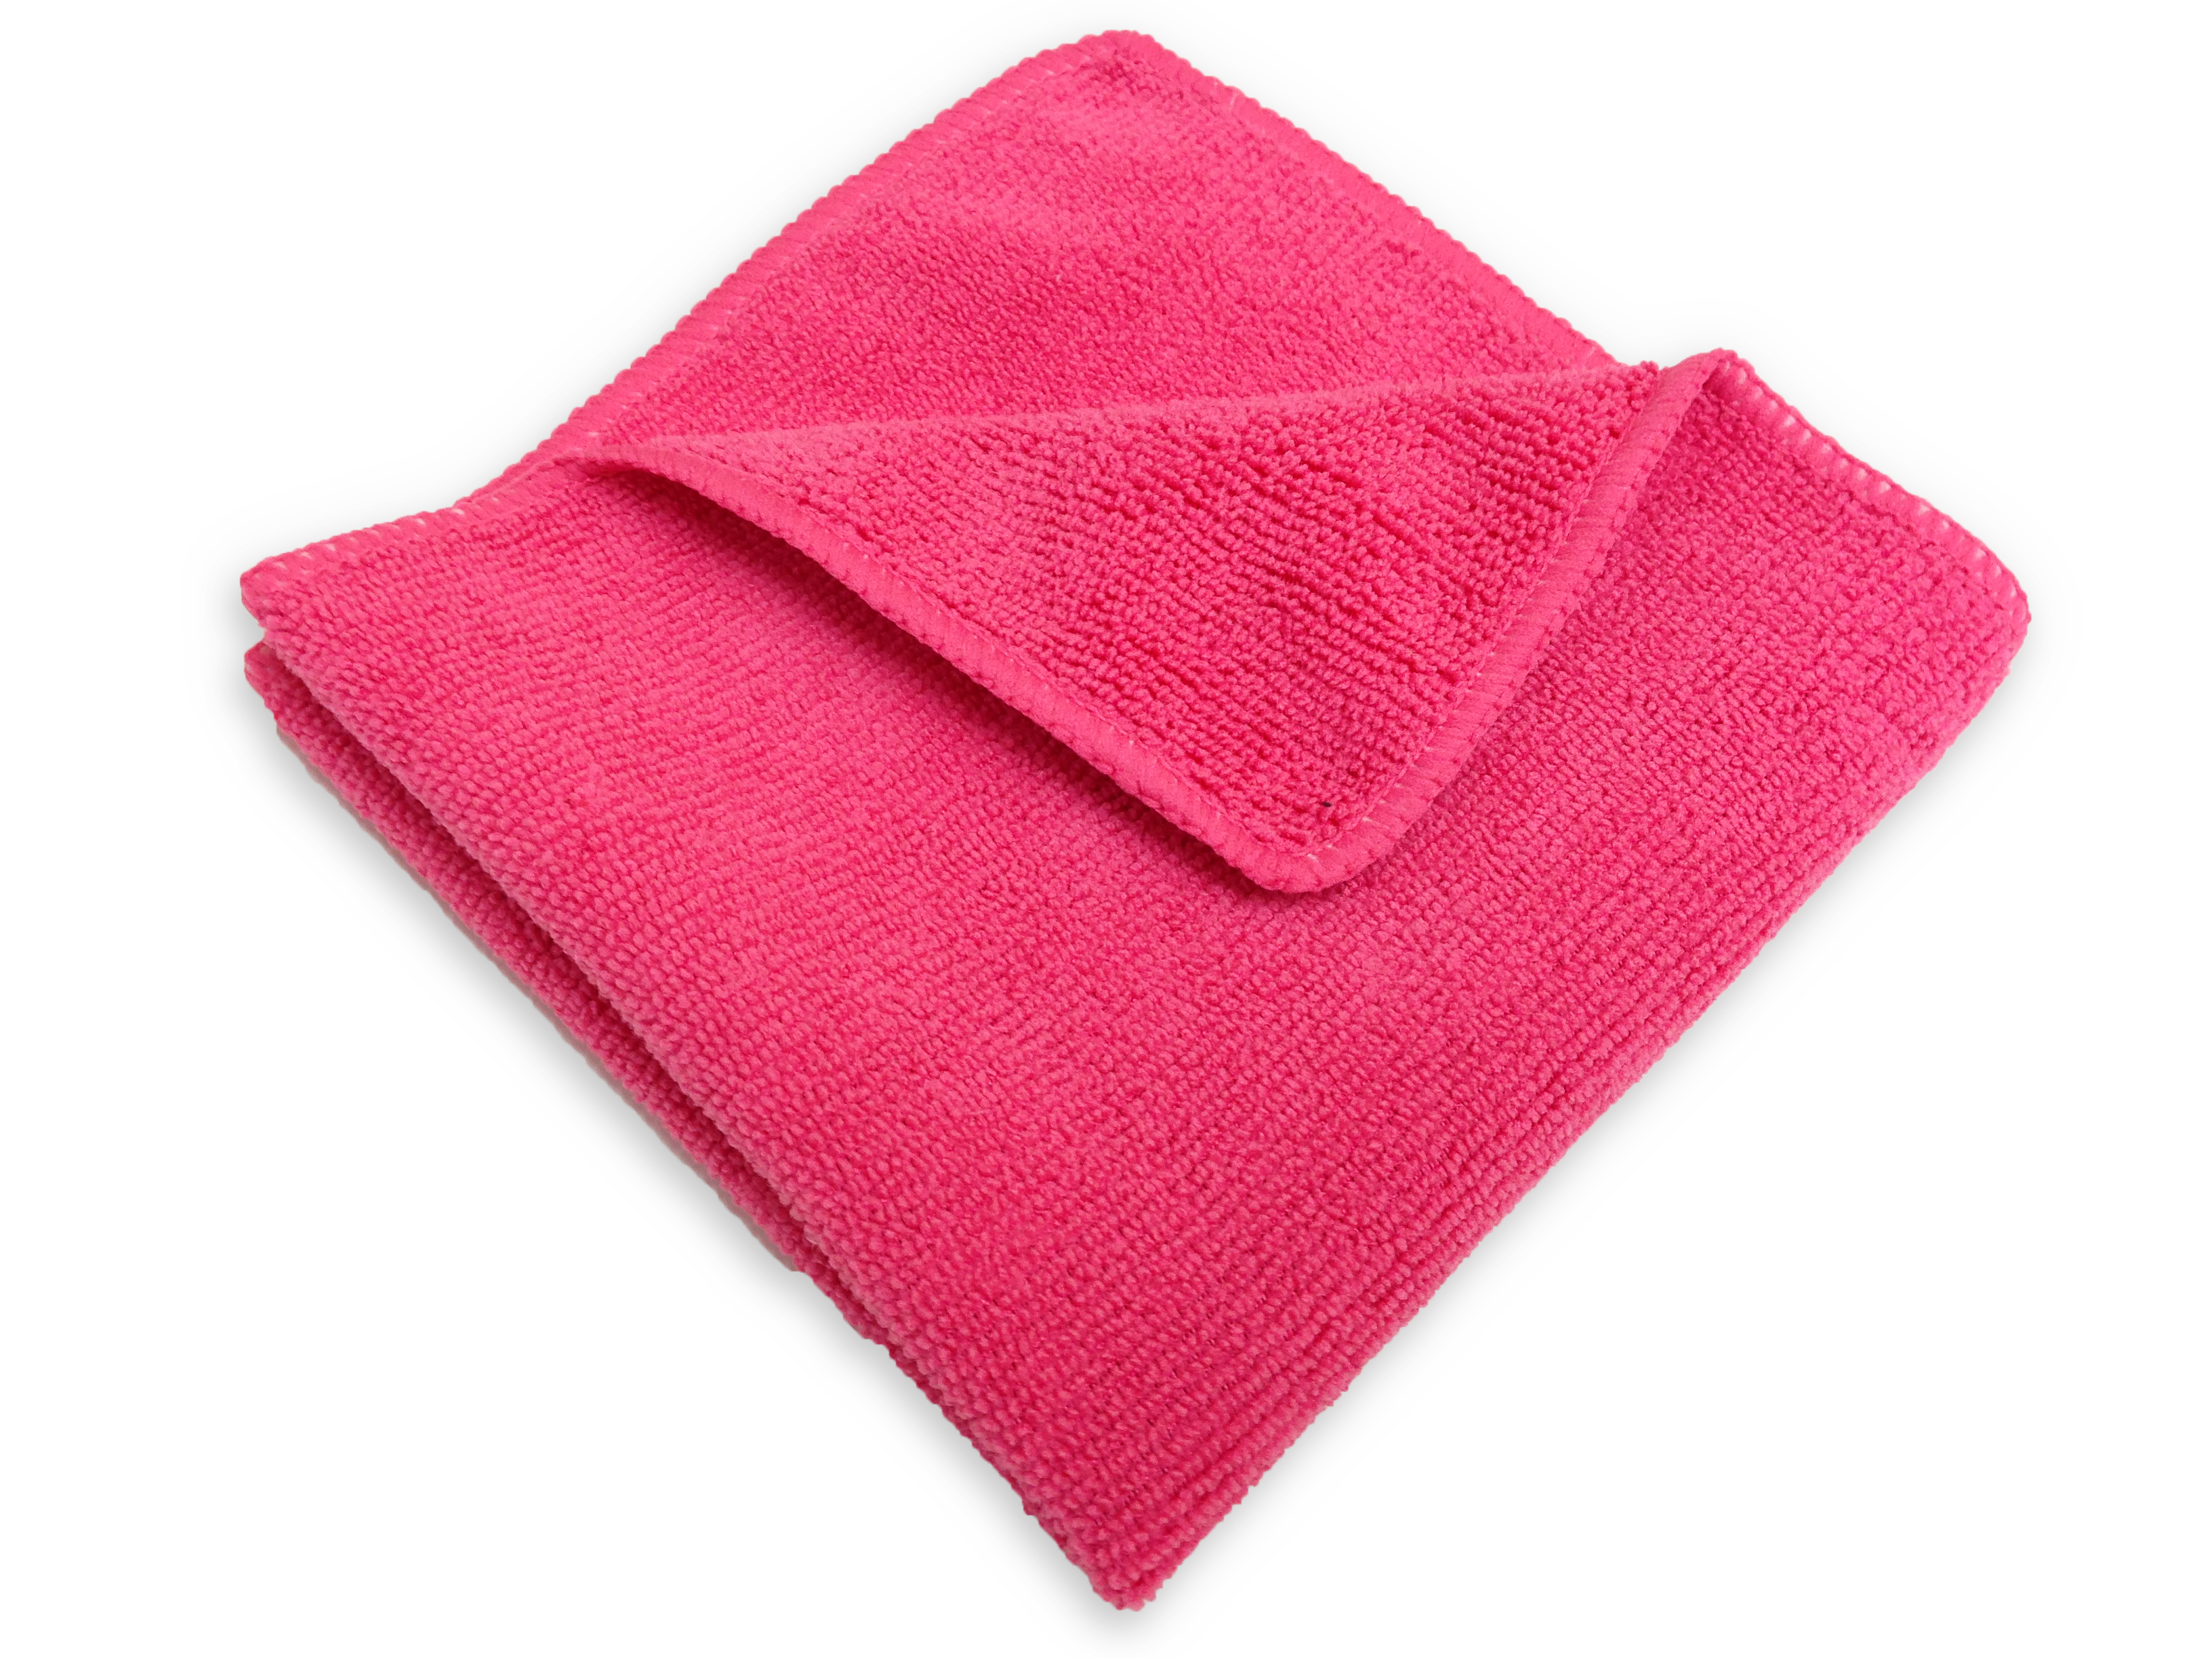 240 Pink Microfiber 14"x14" Cleaning Detailing Cloths Towel Auto Car Rag 300GSM